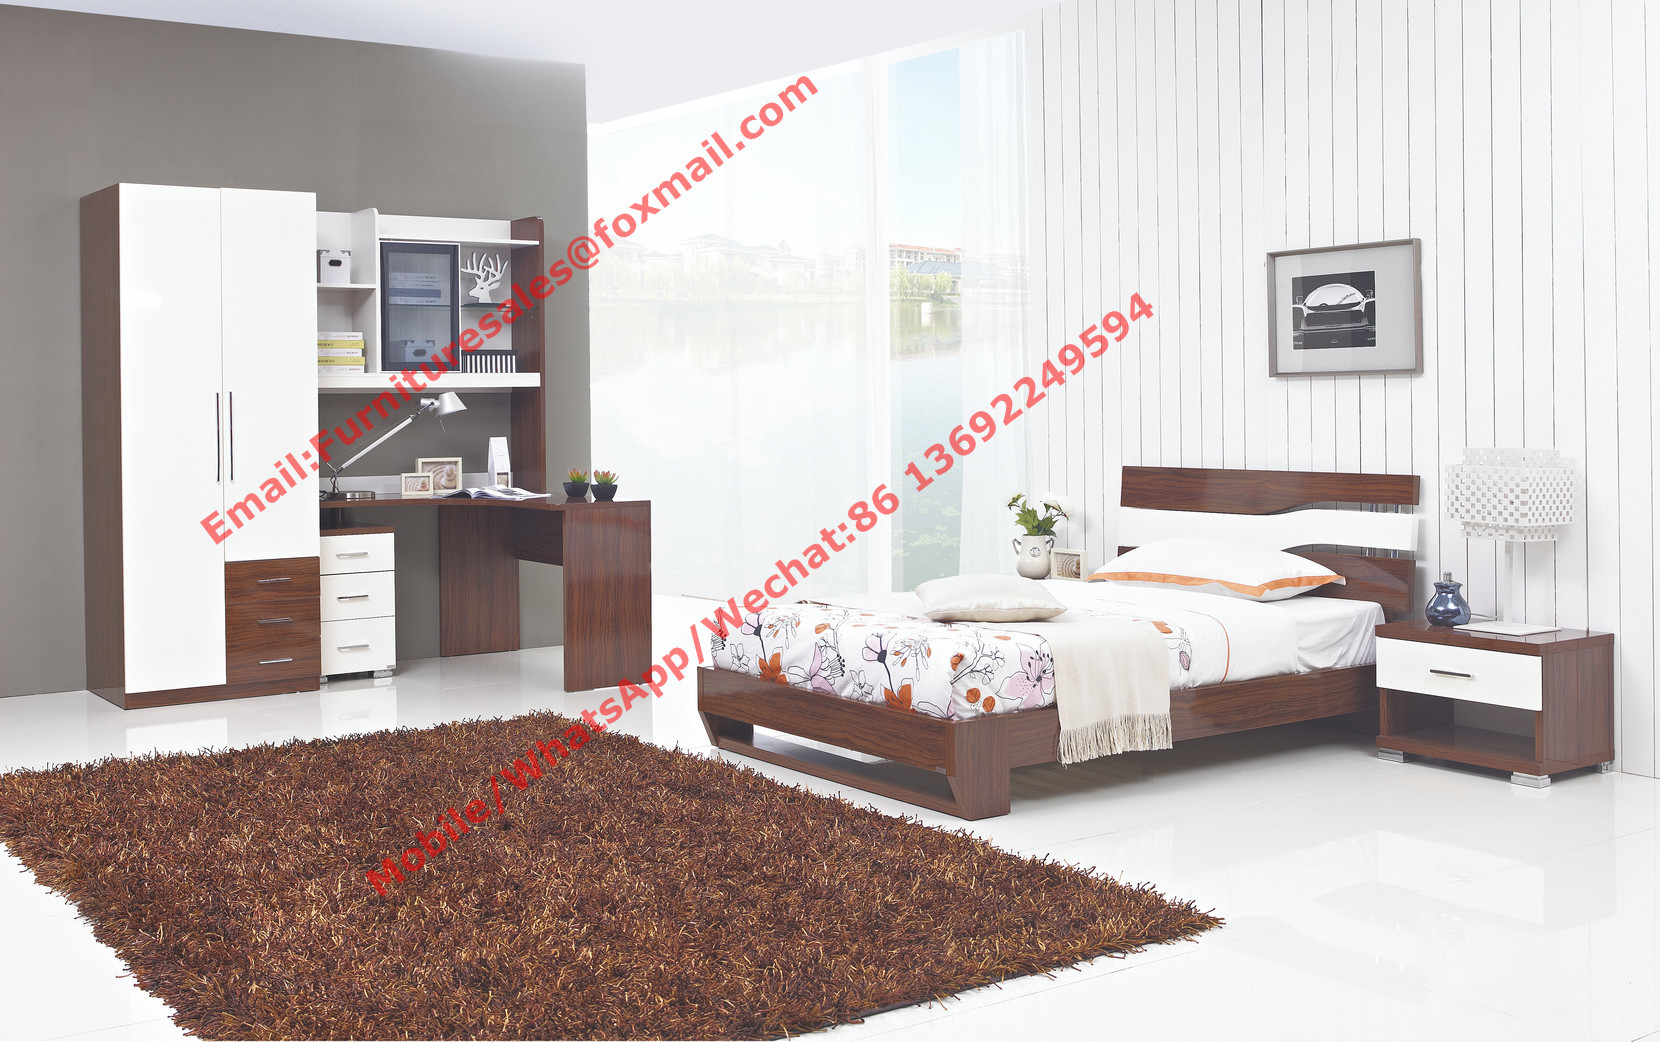  Smart kids bedroom furniture sets cheap price in Environmental MDF made in Shenzhen China Manufactures